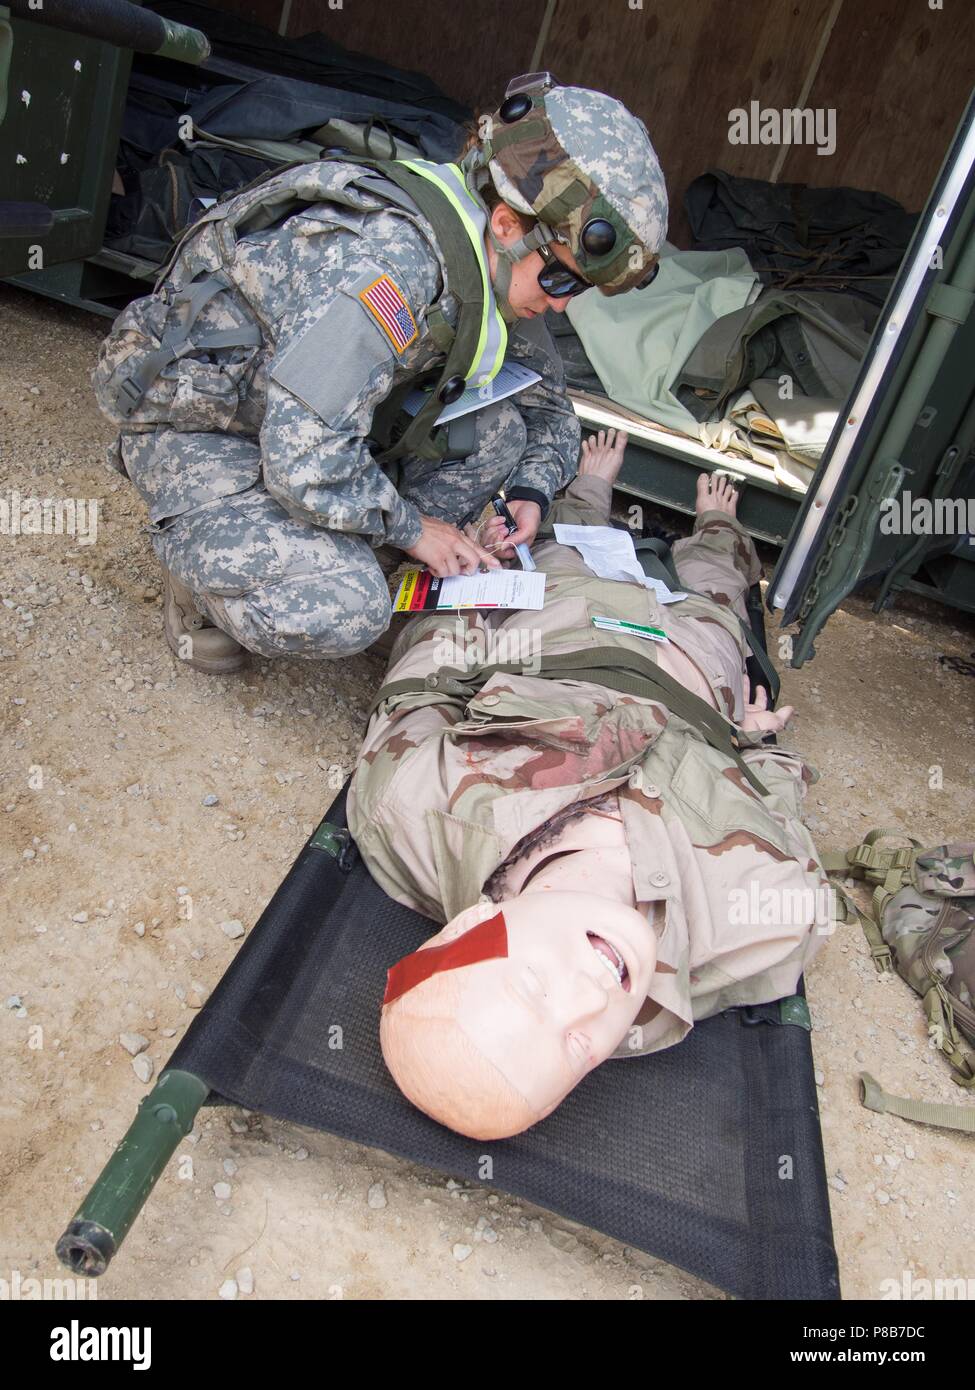 U.S. Army Reserve Soldiers with 865th Combat Support Hospital, based in Utica, N.Y. perform patient evaluations as part of a mass casualty exercise during Regional Medic CSTX 86-18-04, at Tactical Training Base Justice on Fort McCoy, Wisc. June 23, 2018, June 23, 2018. CSTX 86-18-04 is a Combat Support Training Exercise that ensures America's Army Reserve units and Soldiers are trained and ready to deploy on short-notice and bring capable, combat-ready, and lethal firepower in support of the Army and our joint partners anywhere in the world. U.S. Army Reserve photo by Staff Sgt. Eric W. Jones. Stock Photo